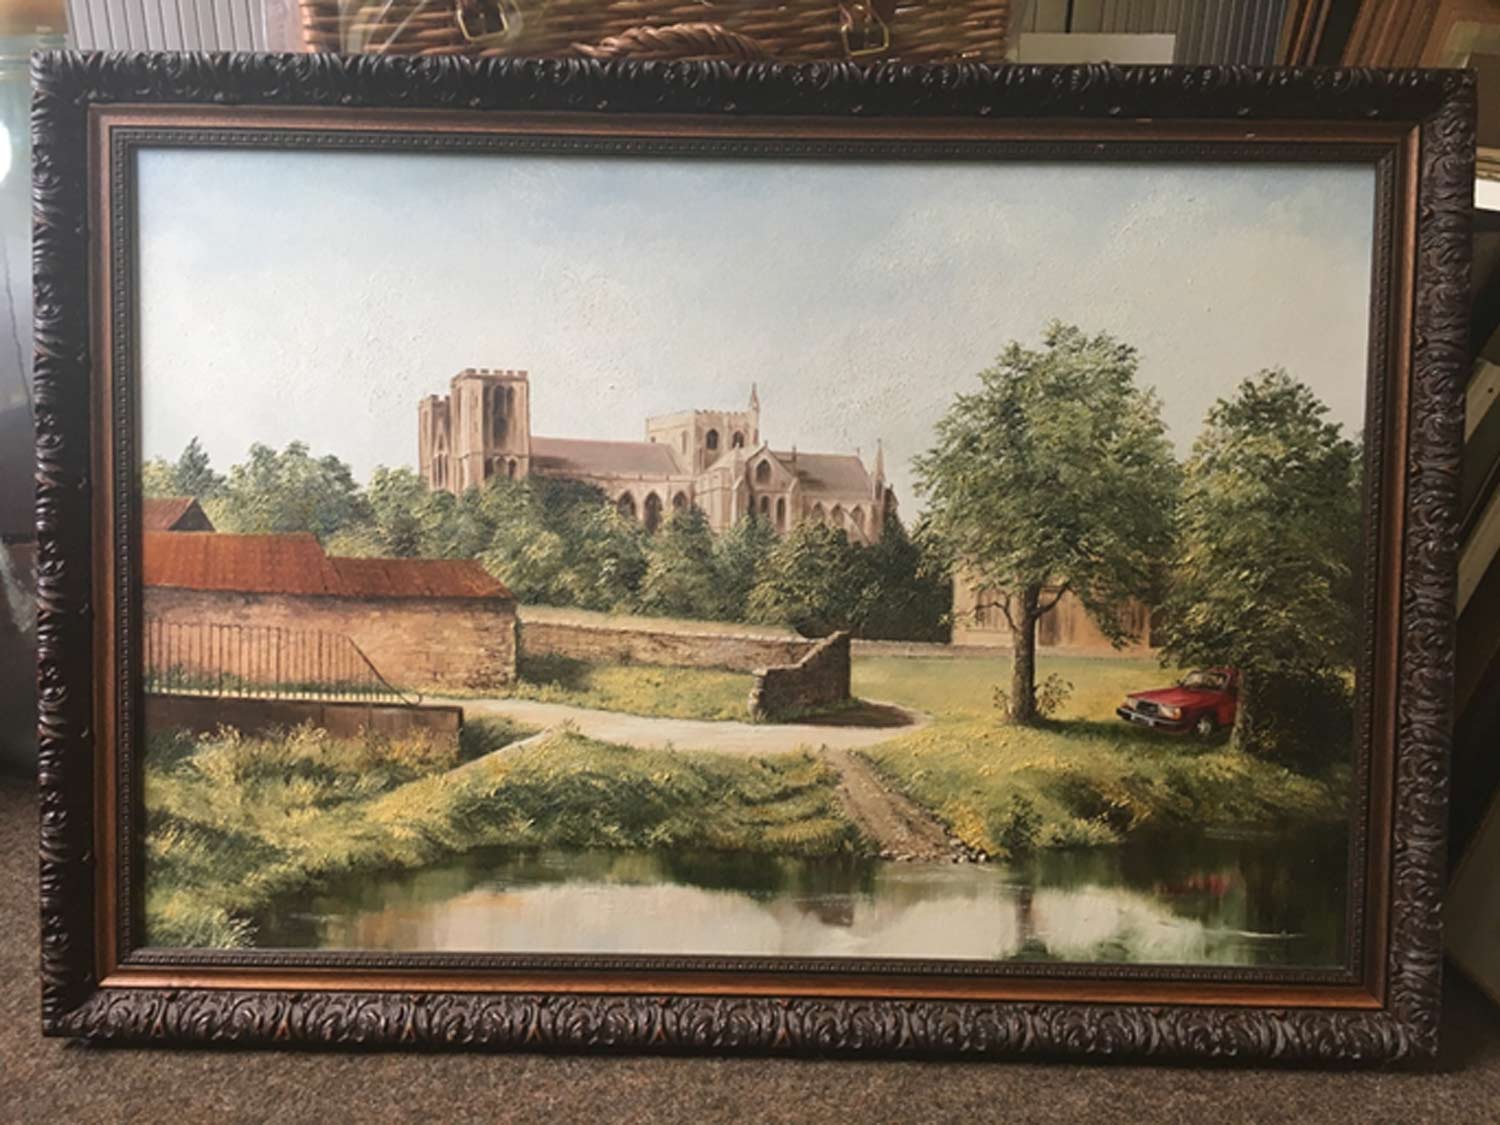 A surprise parcel was delivered to the Ripon Cathedral Office in the form of a large painting of the magnificent Ripon Cathedral which has been kindly donated by past Ripon resident Charles Hunter Pease, now living in Oxford